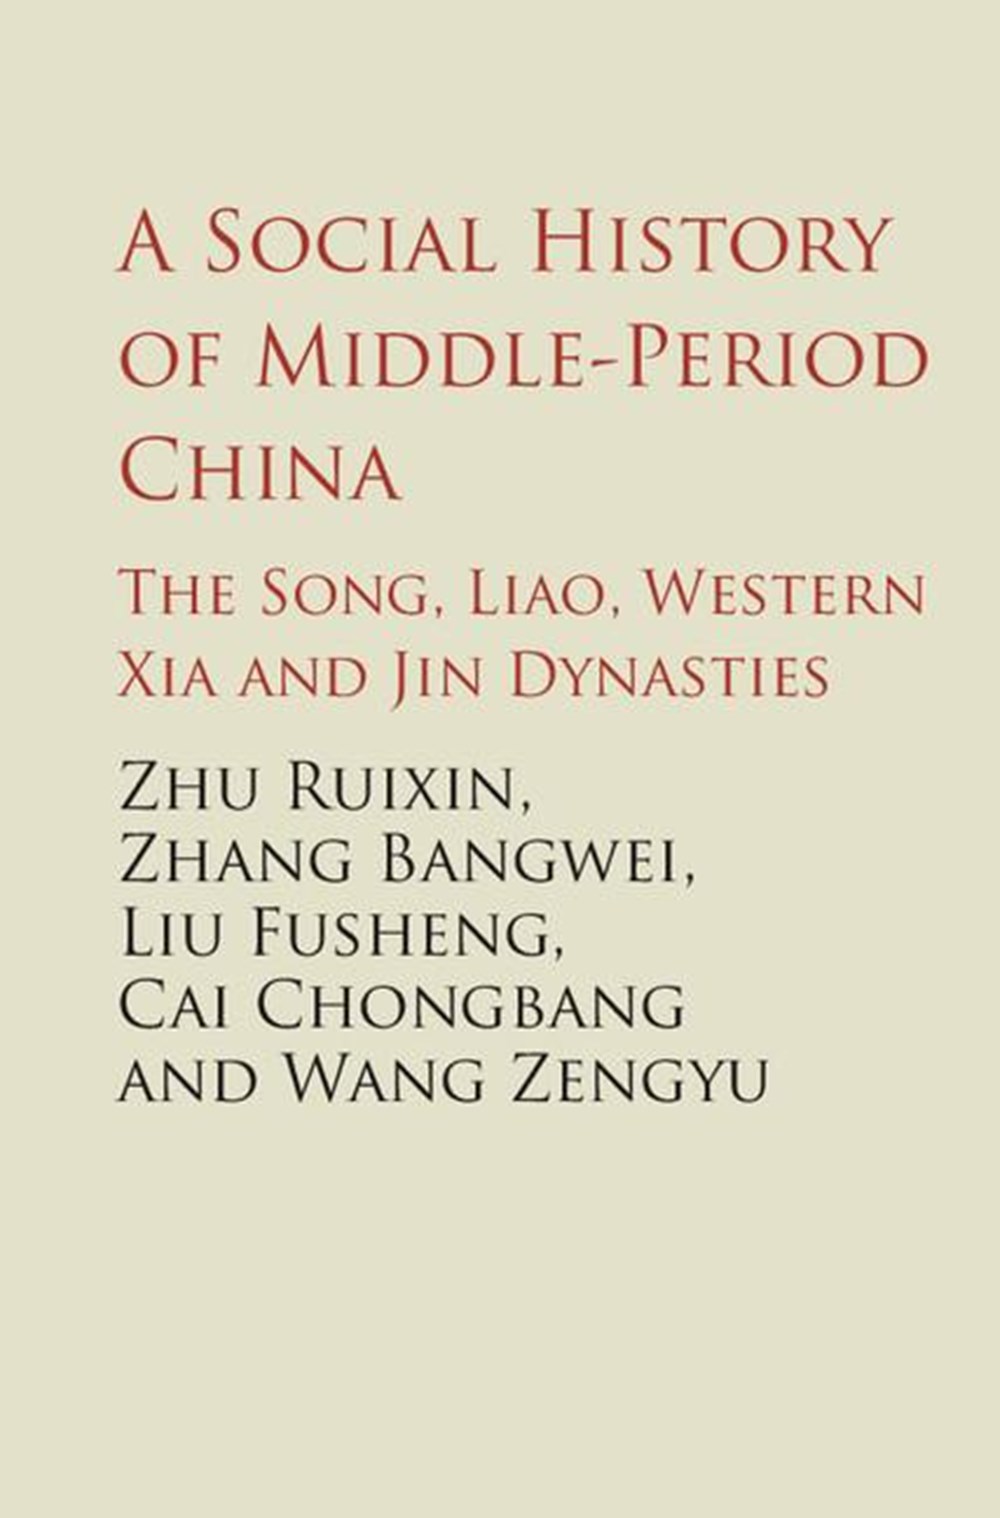 Social History of Middle-Period China: The Song, Liao, Western Xia and Jin Dynasties